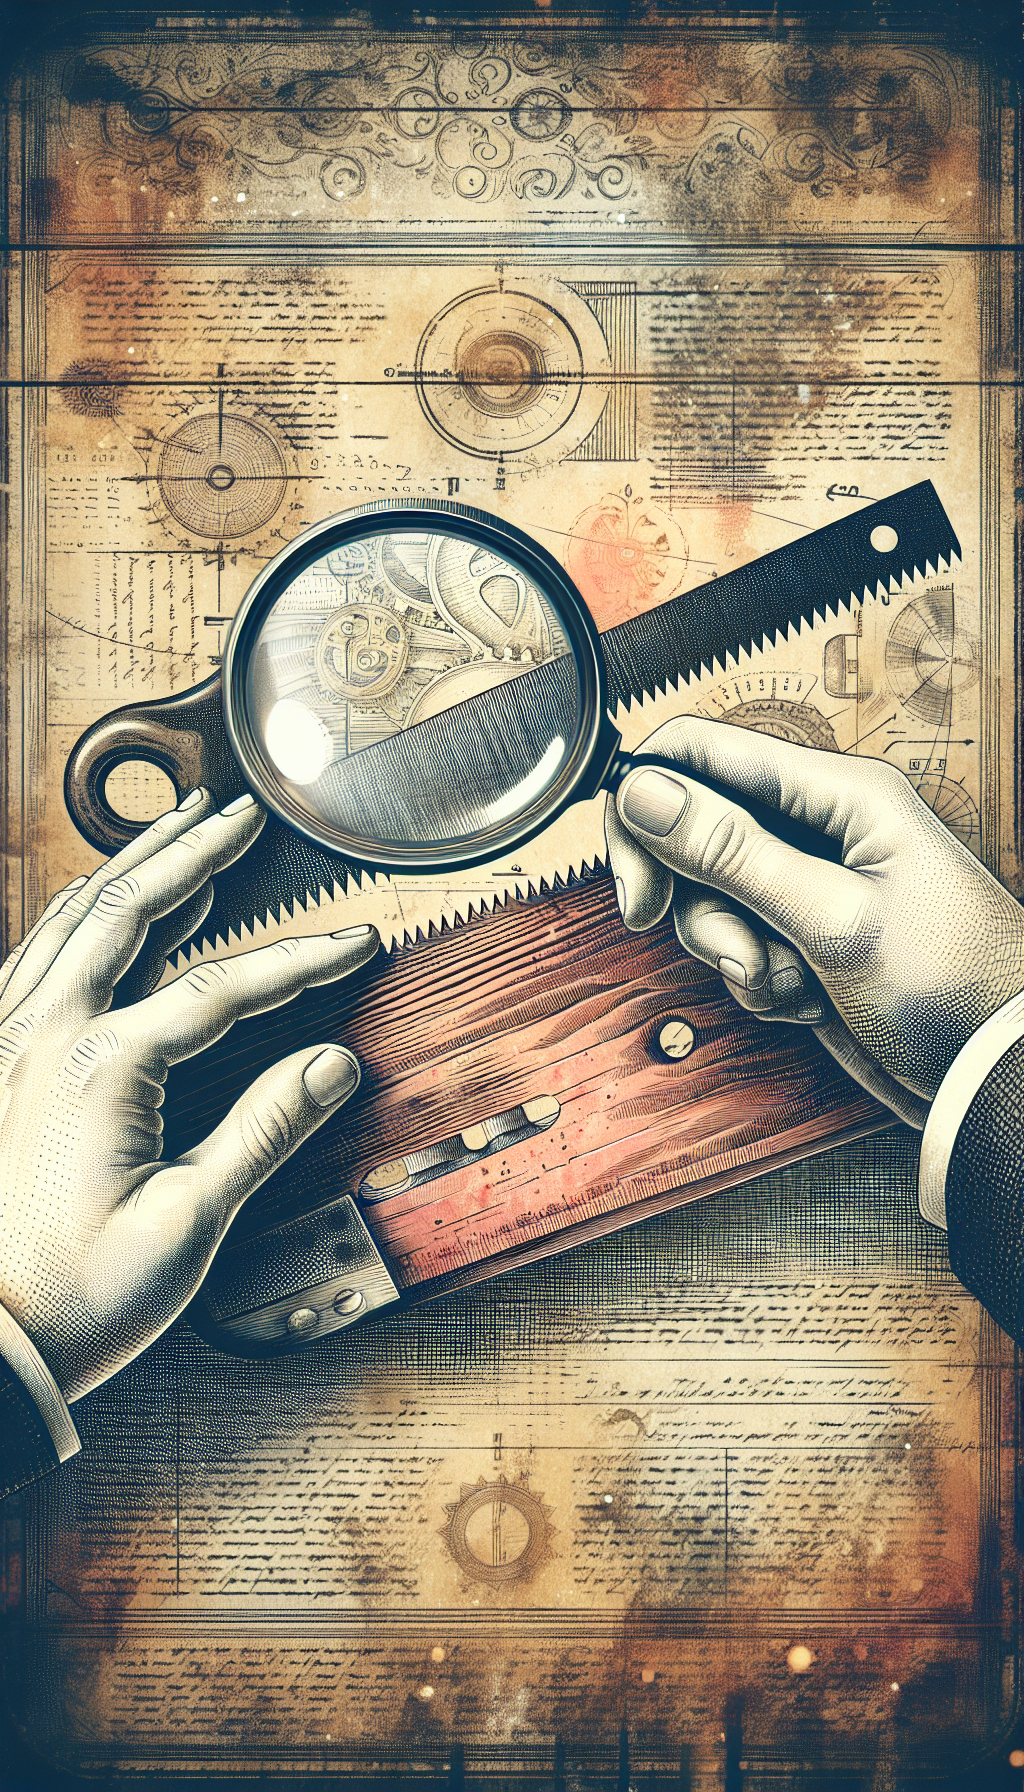 A vintage-styled illustration depicts a pair of hands delicately holding a magnifying glass over an ancient crosscut saw, with subtle lines and annotations indicating key identification markers. Flecks of rust contrast with glimmers of restored metal, while a watermark-style backdrop of archival text and sketches suggests a rich history, underscoring the theme of authentication and preservation.